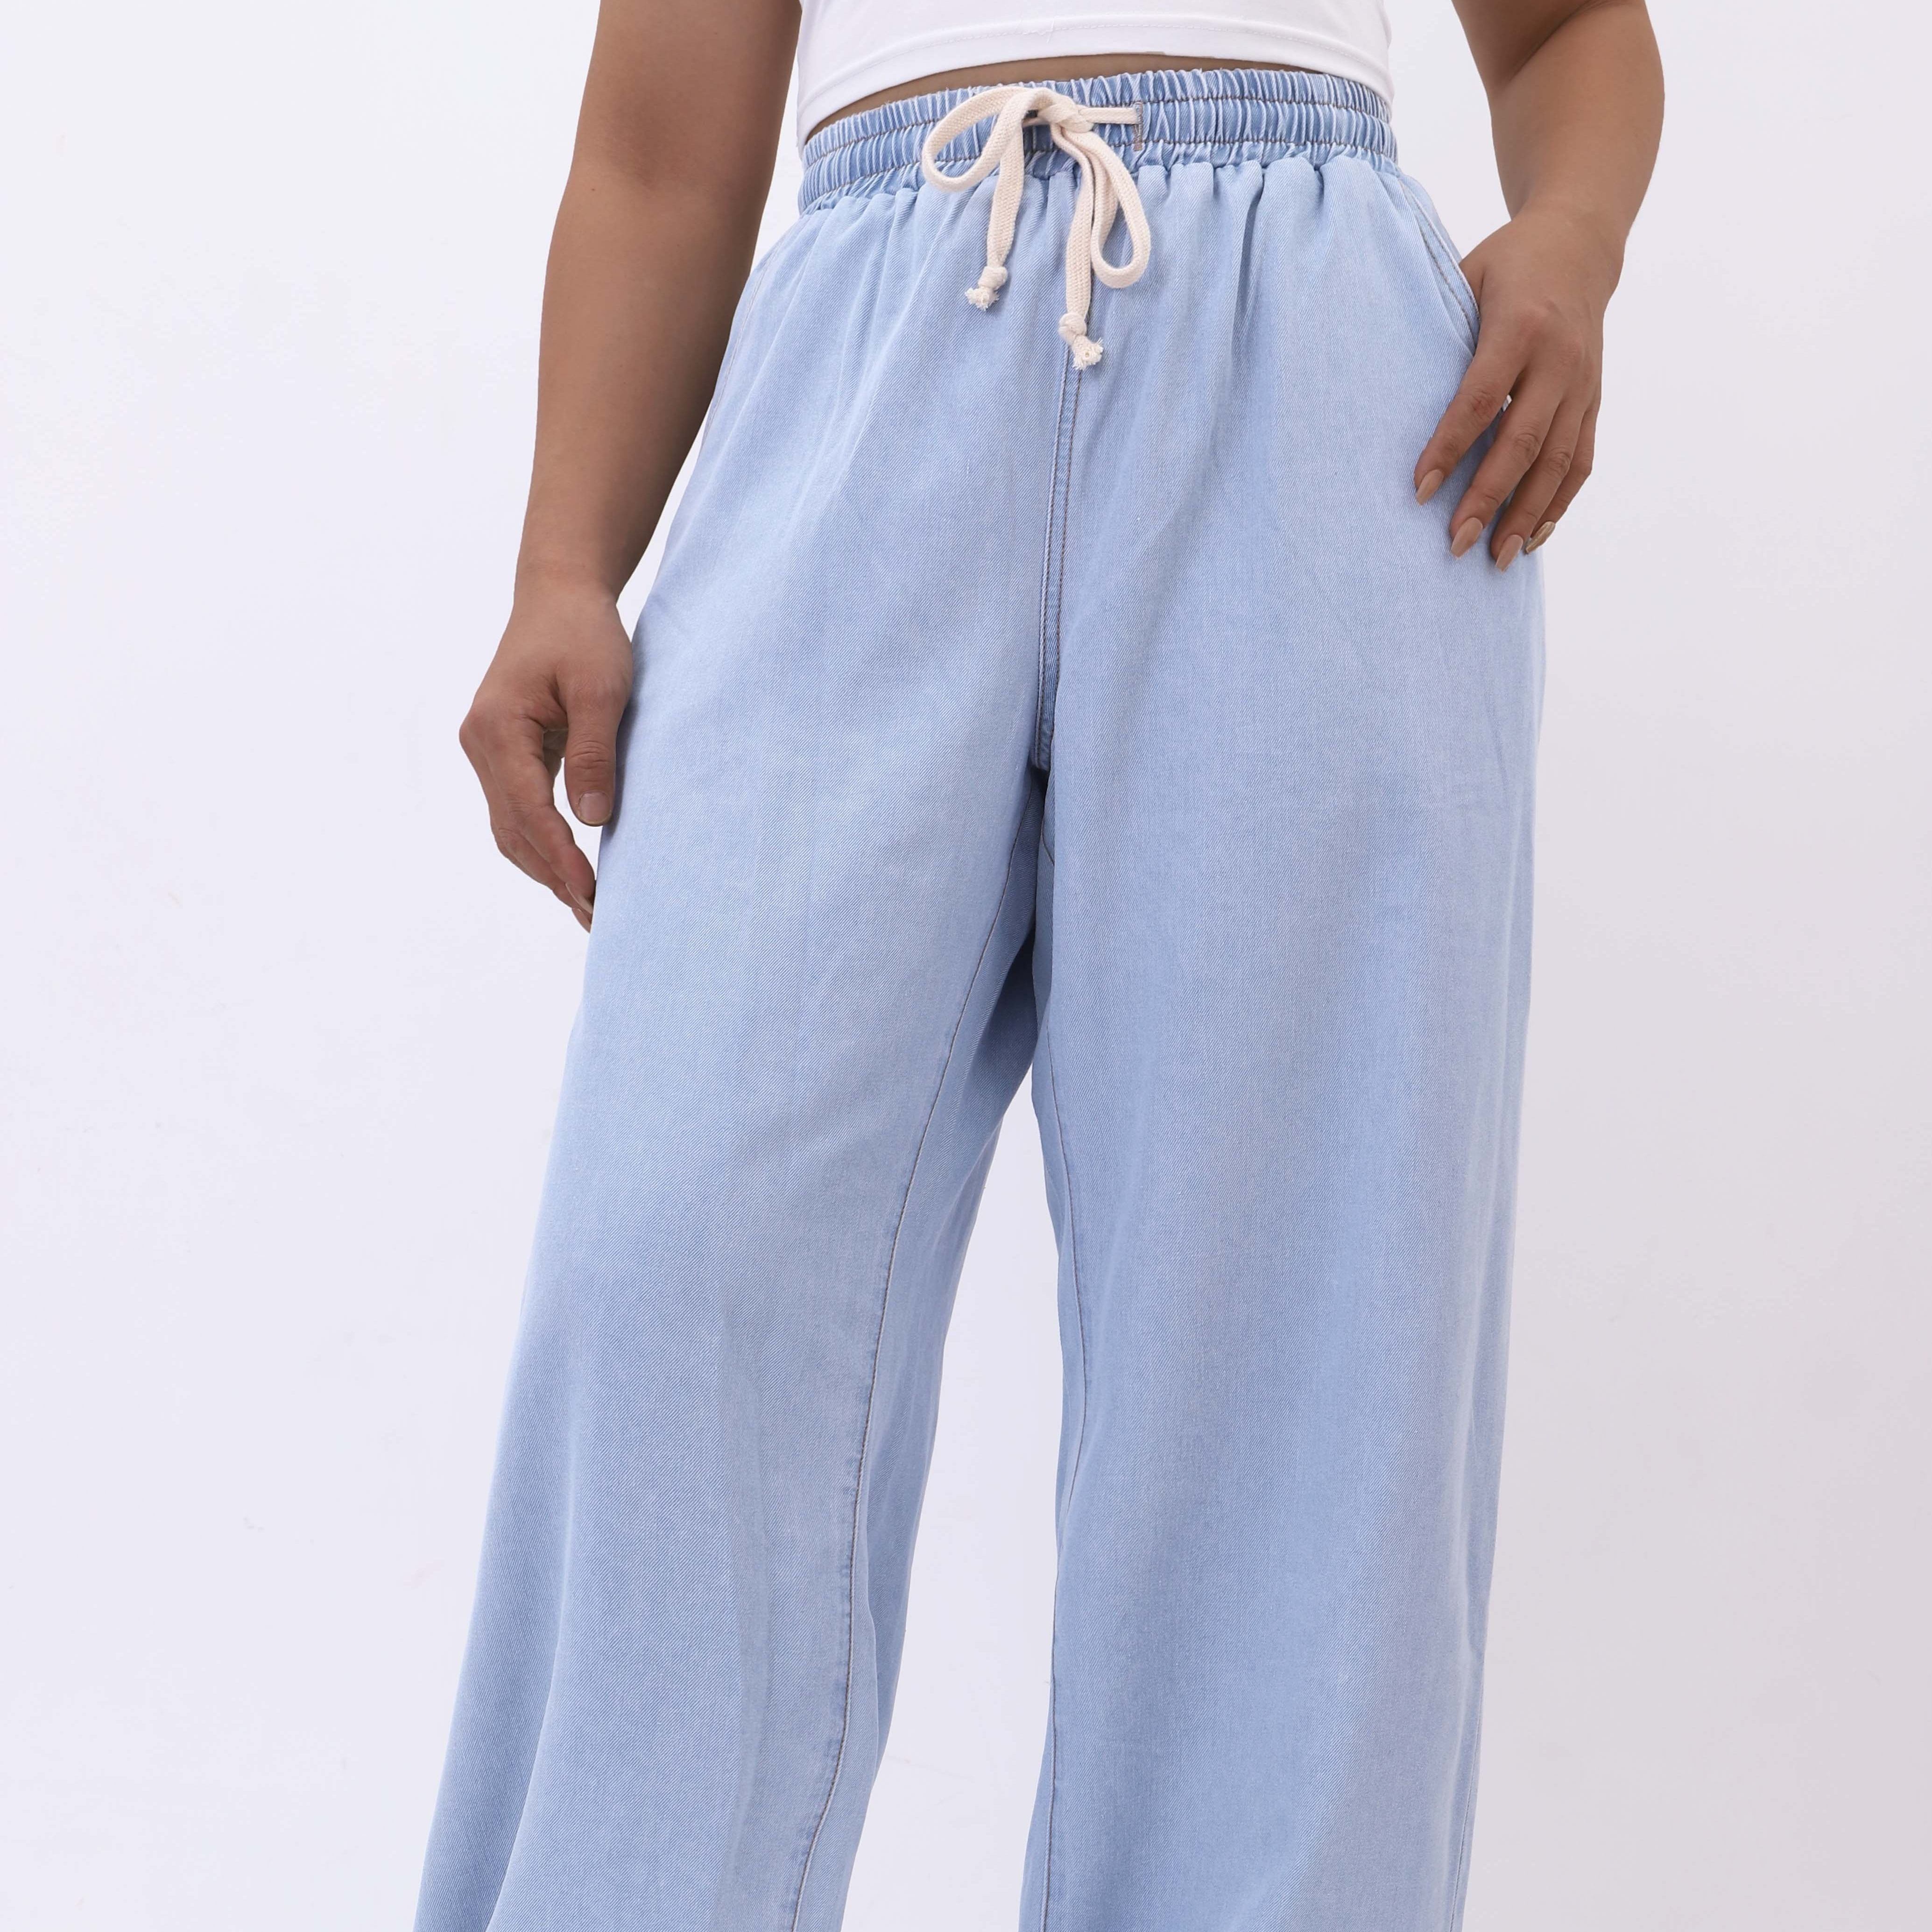 

Women's Plus Size Light Blue Denim Wide-leg Pants, Casual Style, Elastic Waist With Drawstring, Relaxed Fit Jean Trousers For Fall